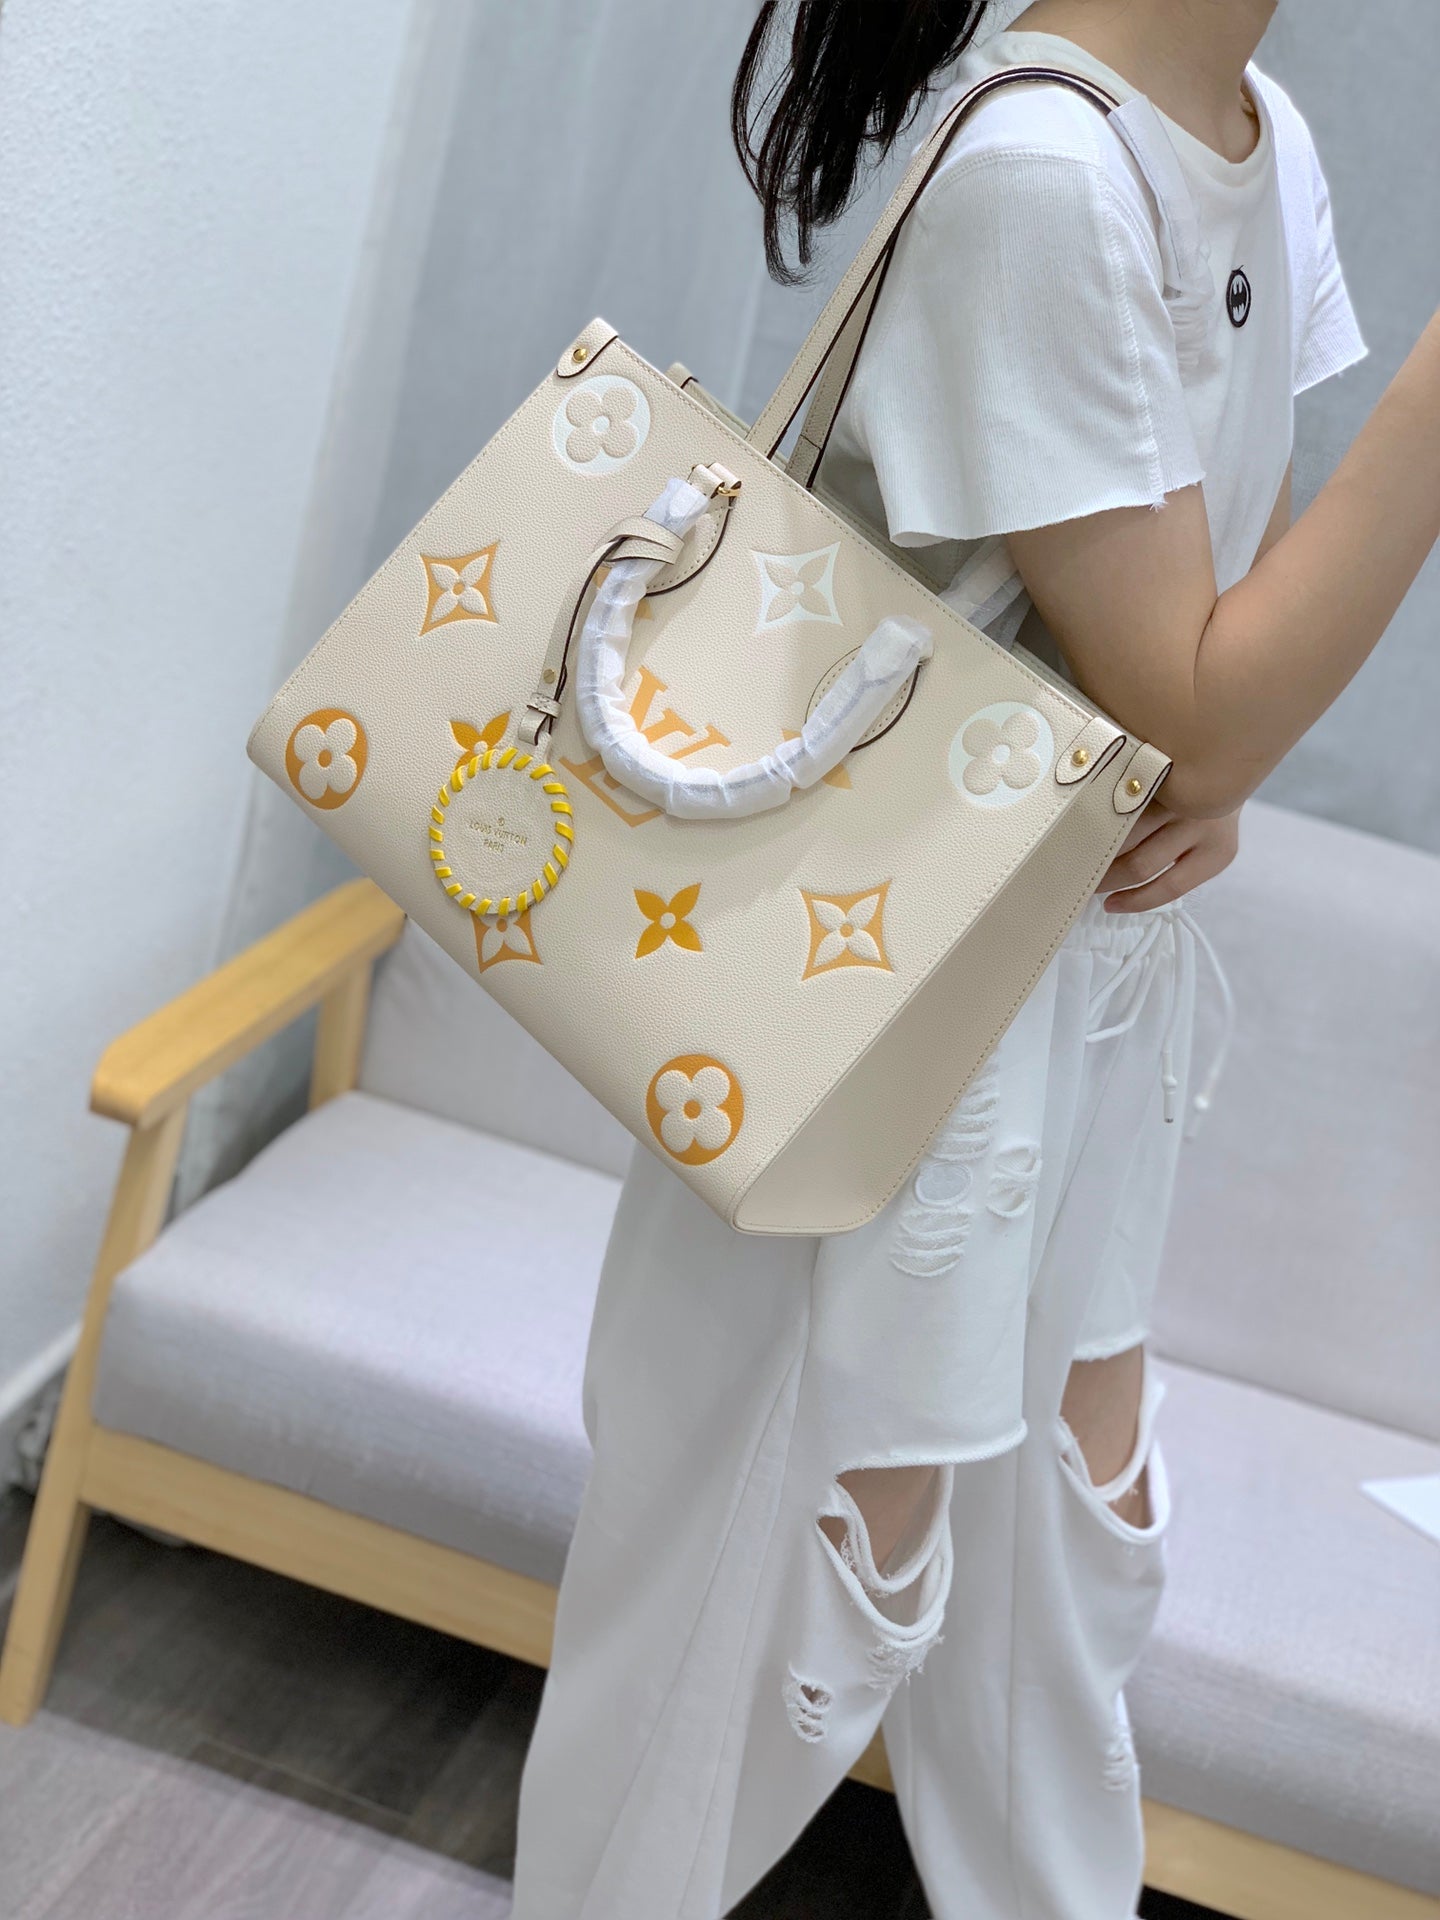 SO - New Fashion Women's Bags LUV By the Pool Monogram A068 sneakeronline